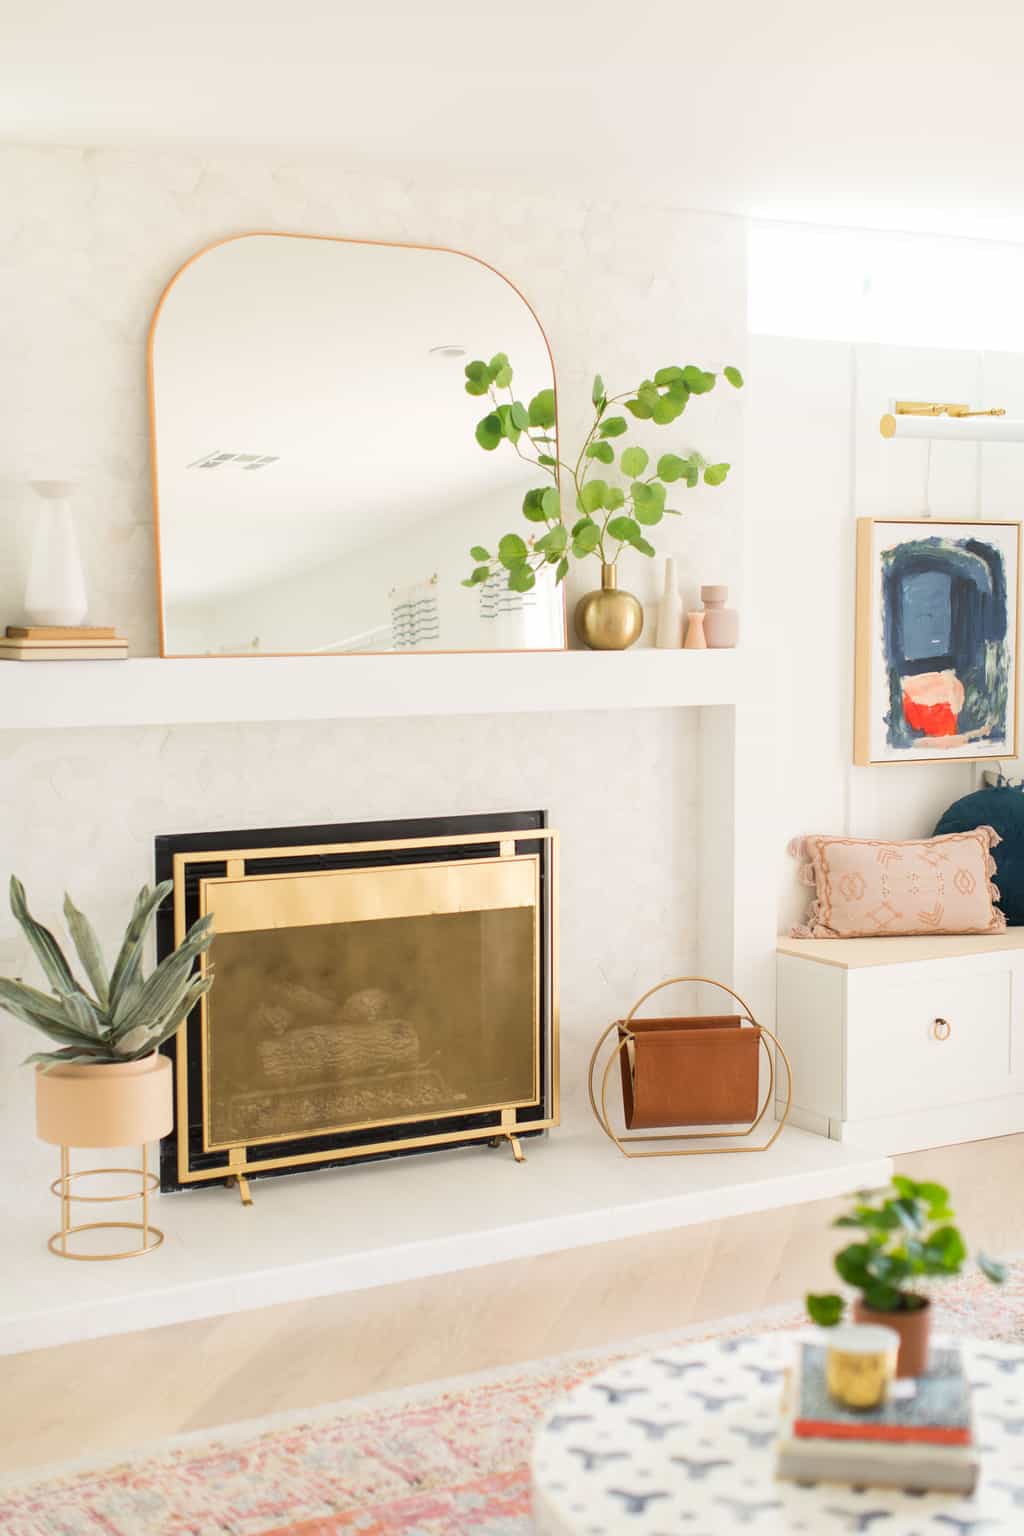 12 Empty Fireplace Ideas - How to Style an Unused Fireplace